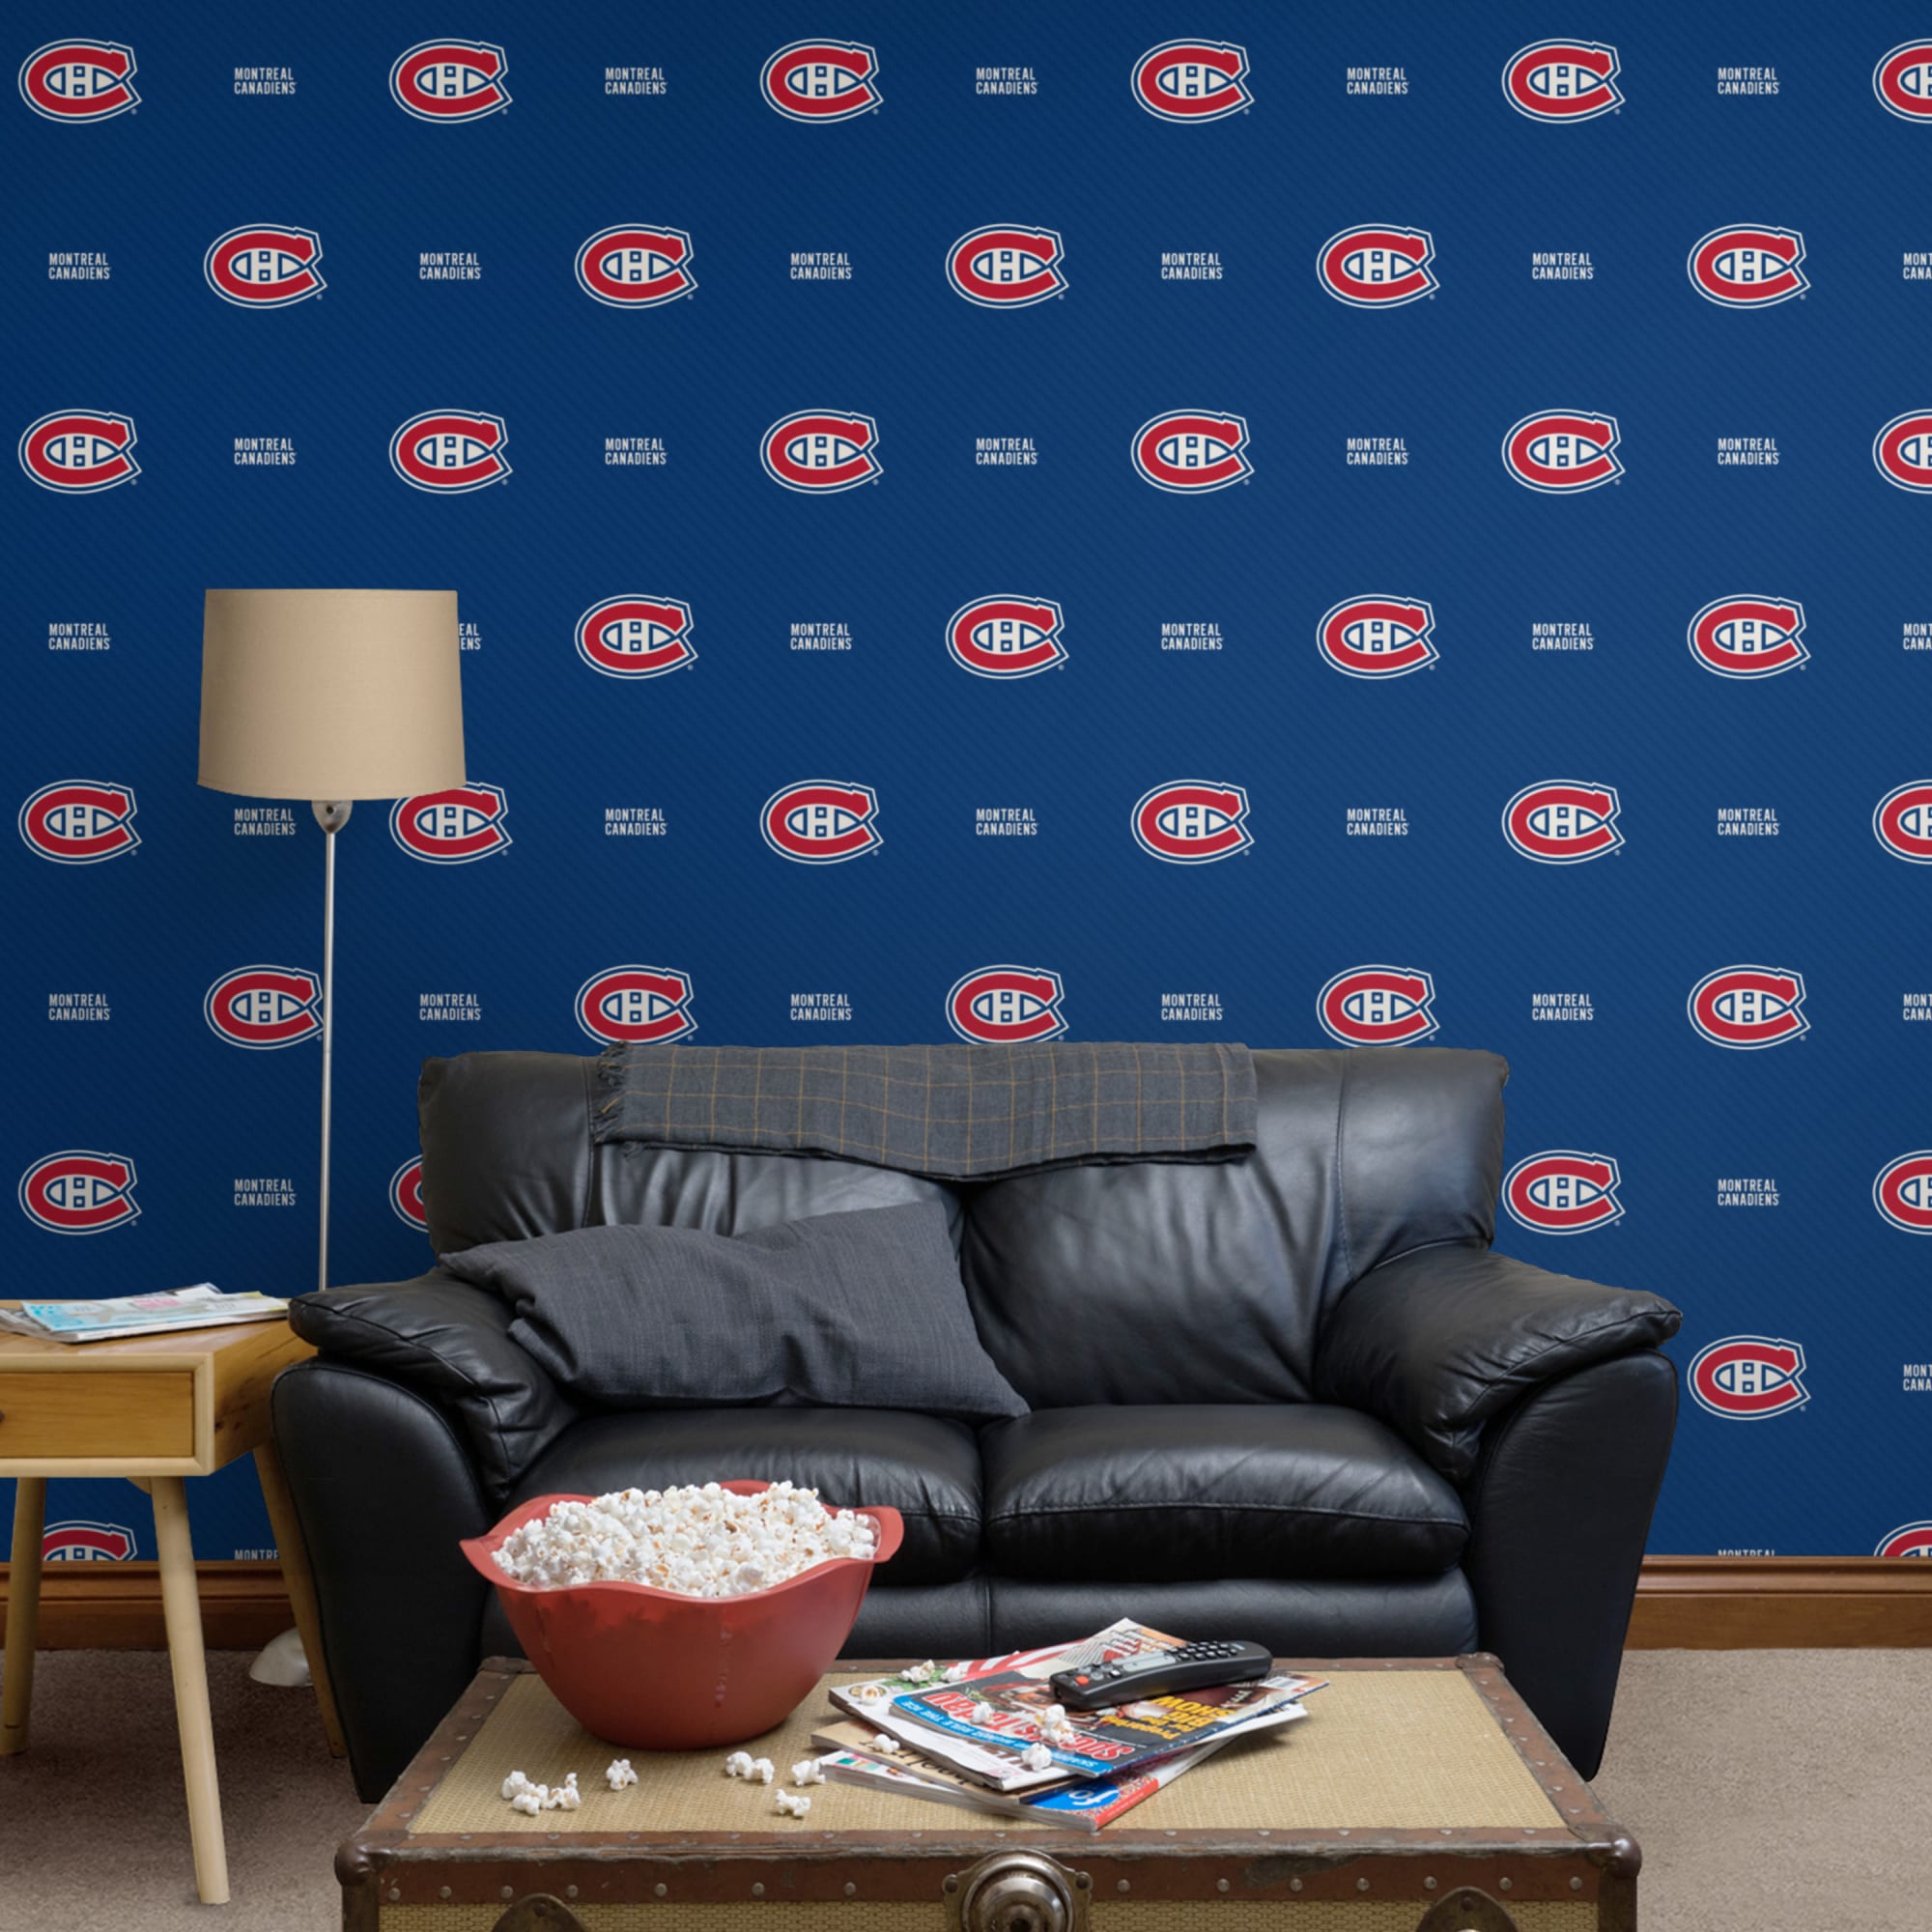 Montreal Canadiens: Stripes Pattern - Officially Licensed NHL Removable Wallpaper 12" x 12" Sample by Fathead | 100% Vinyl